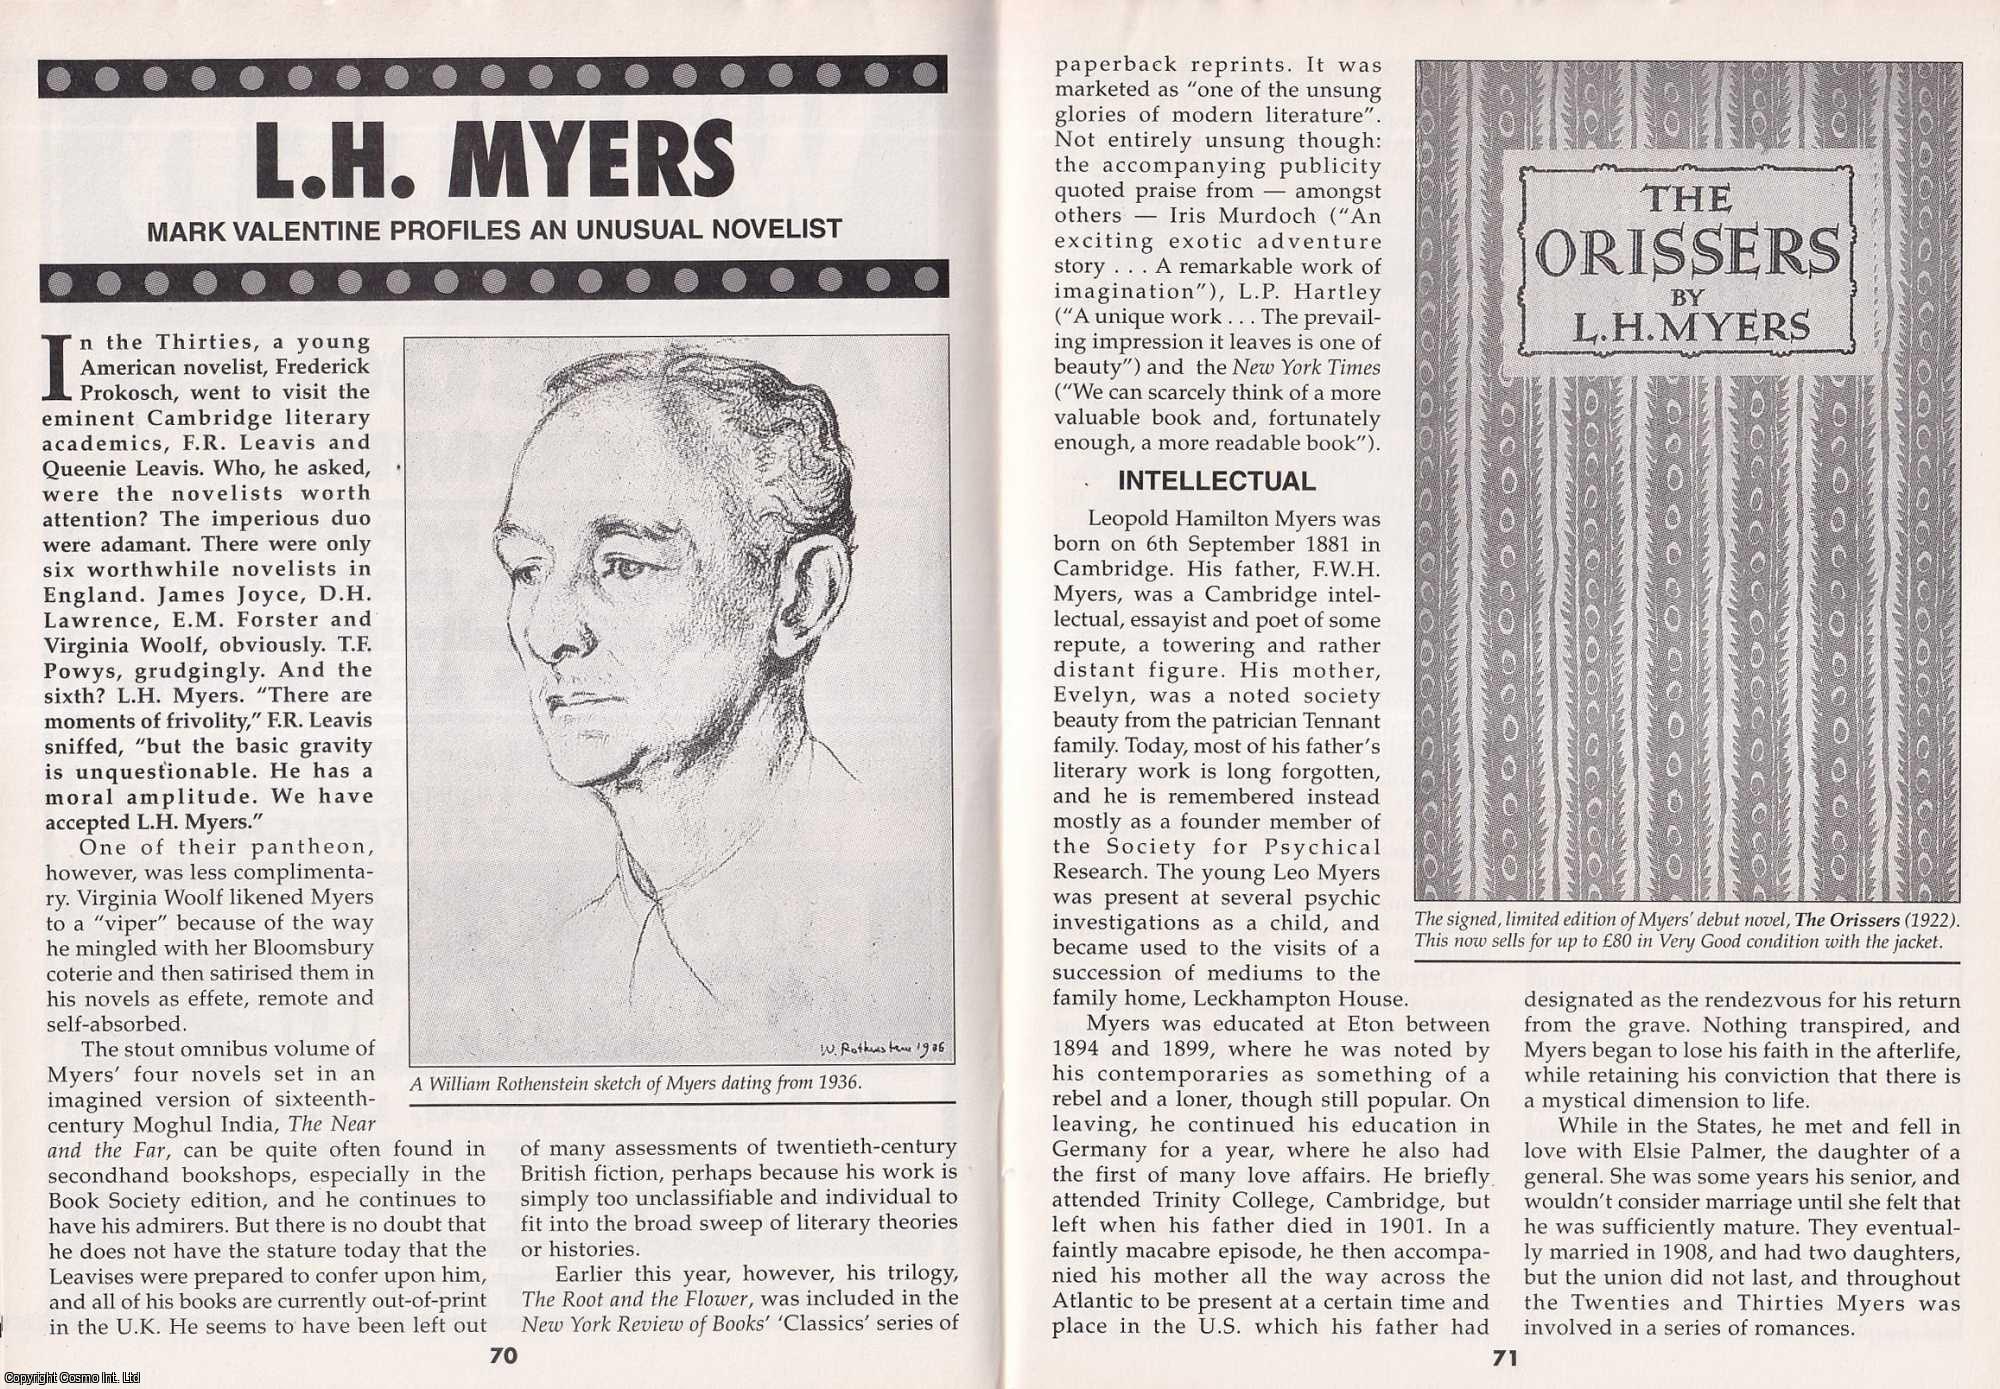 Mark Valentine - L. H. Myers. Profiling an Unusual Novelist. This is an original article separated from an issue of The Book & Magazine Collector publication.